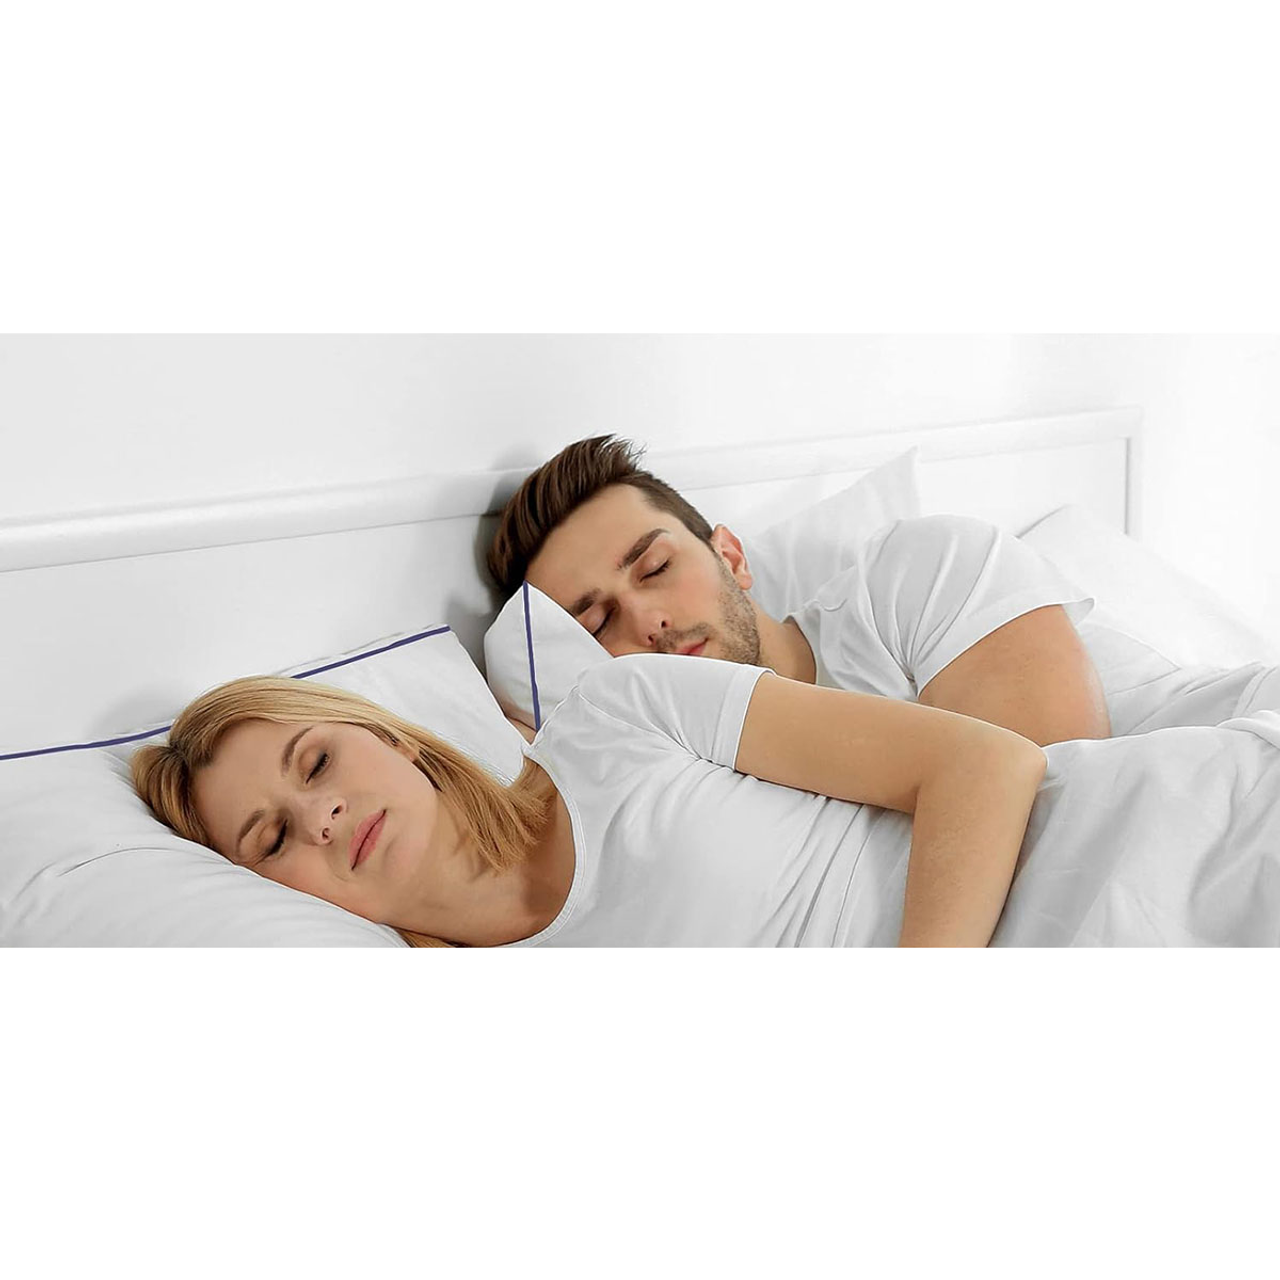 King-Size Pillow Set (1 or 2-Pair) product image